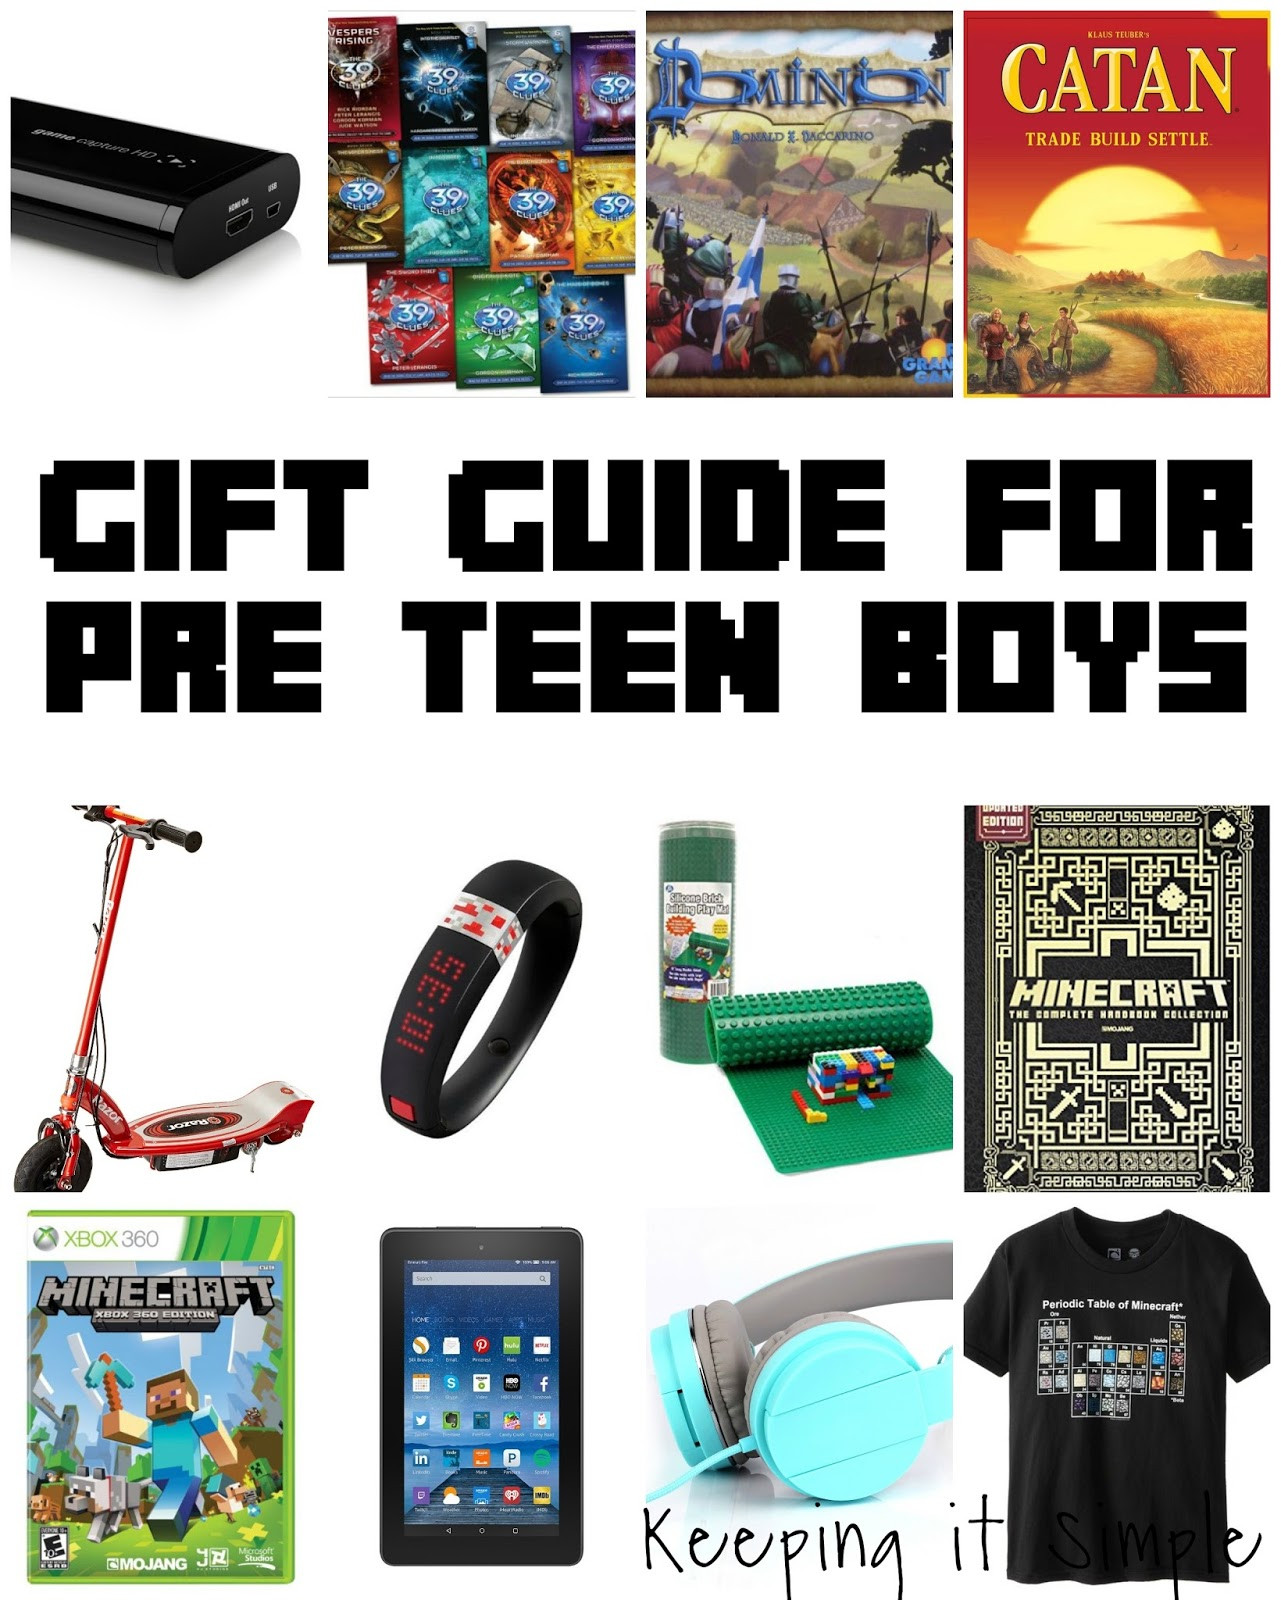 Birthday Gift Ideas For Teen Boys
 Keeping it Simple Guide Gift for Pre Teen Boys and $100